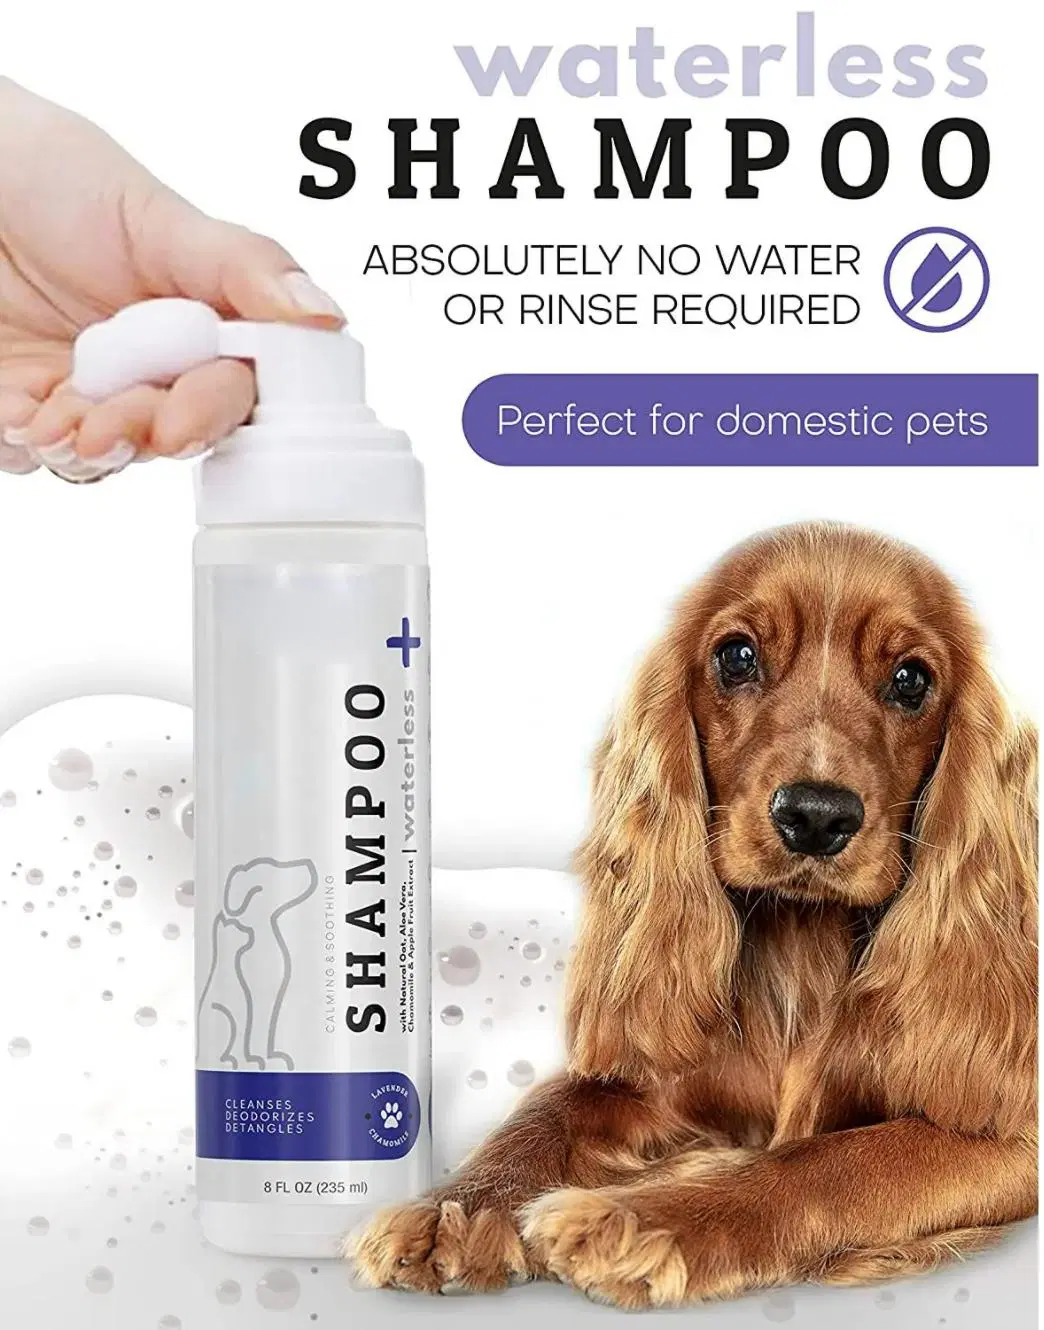 Natural &amp; Hypoallergenic Pet Shampoo Foam Waterless No-Rinse Dry Shampoo for Dogs